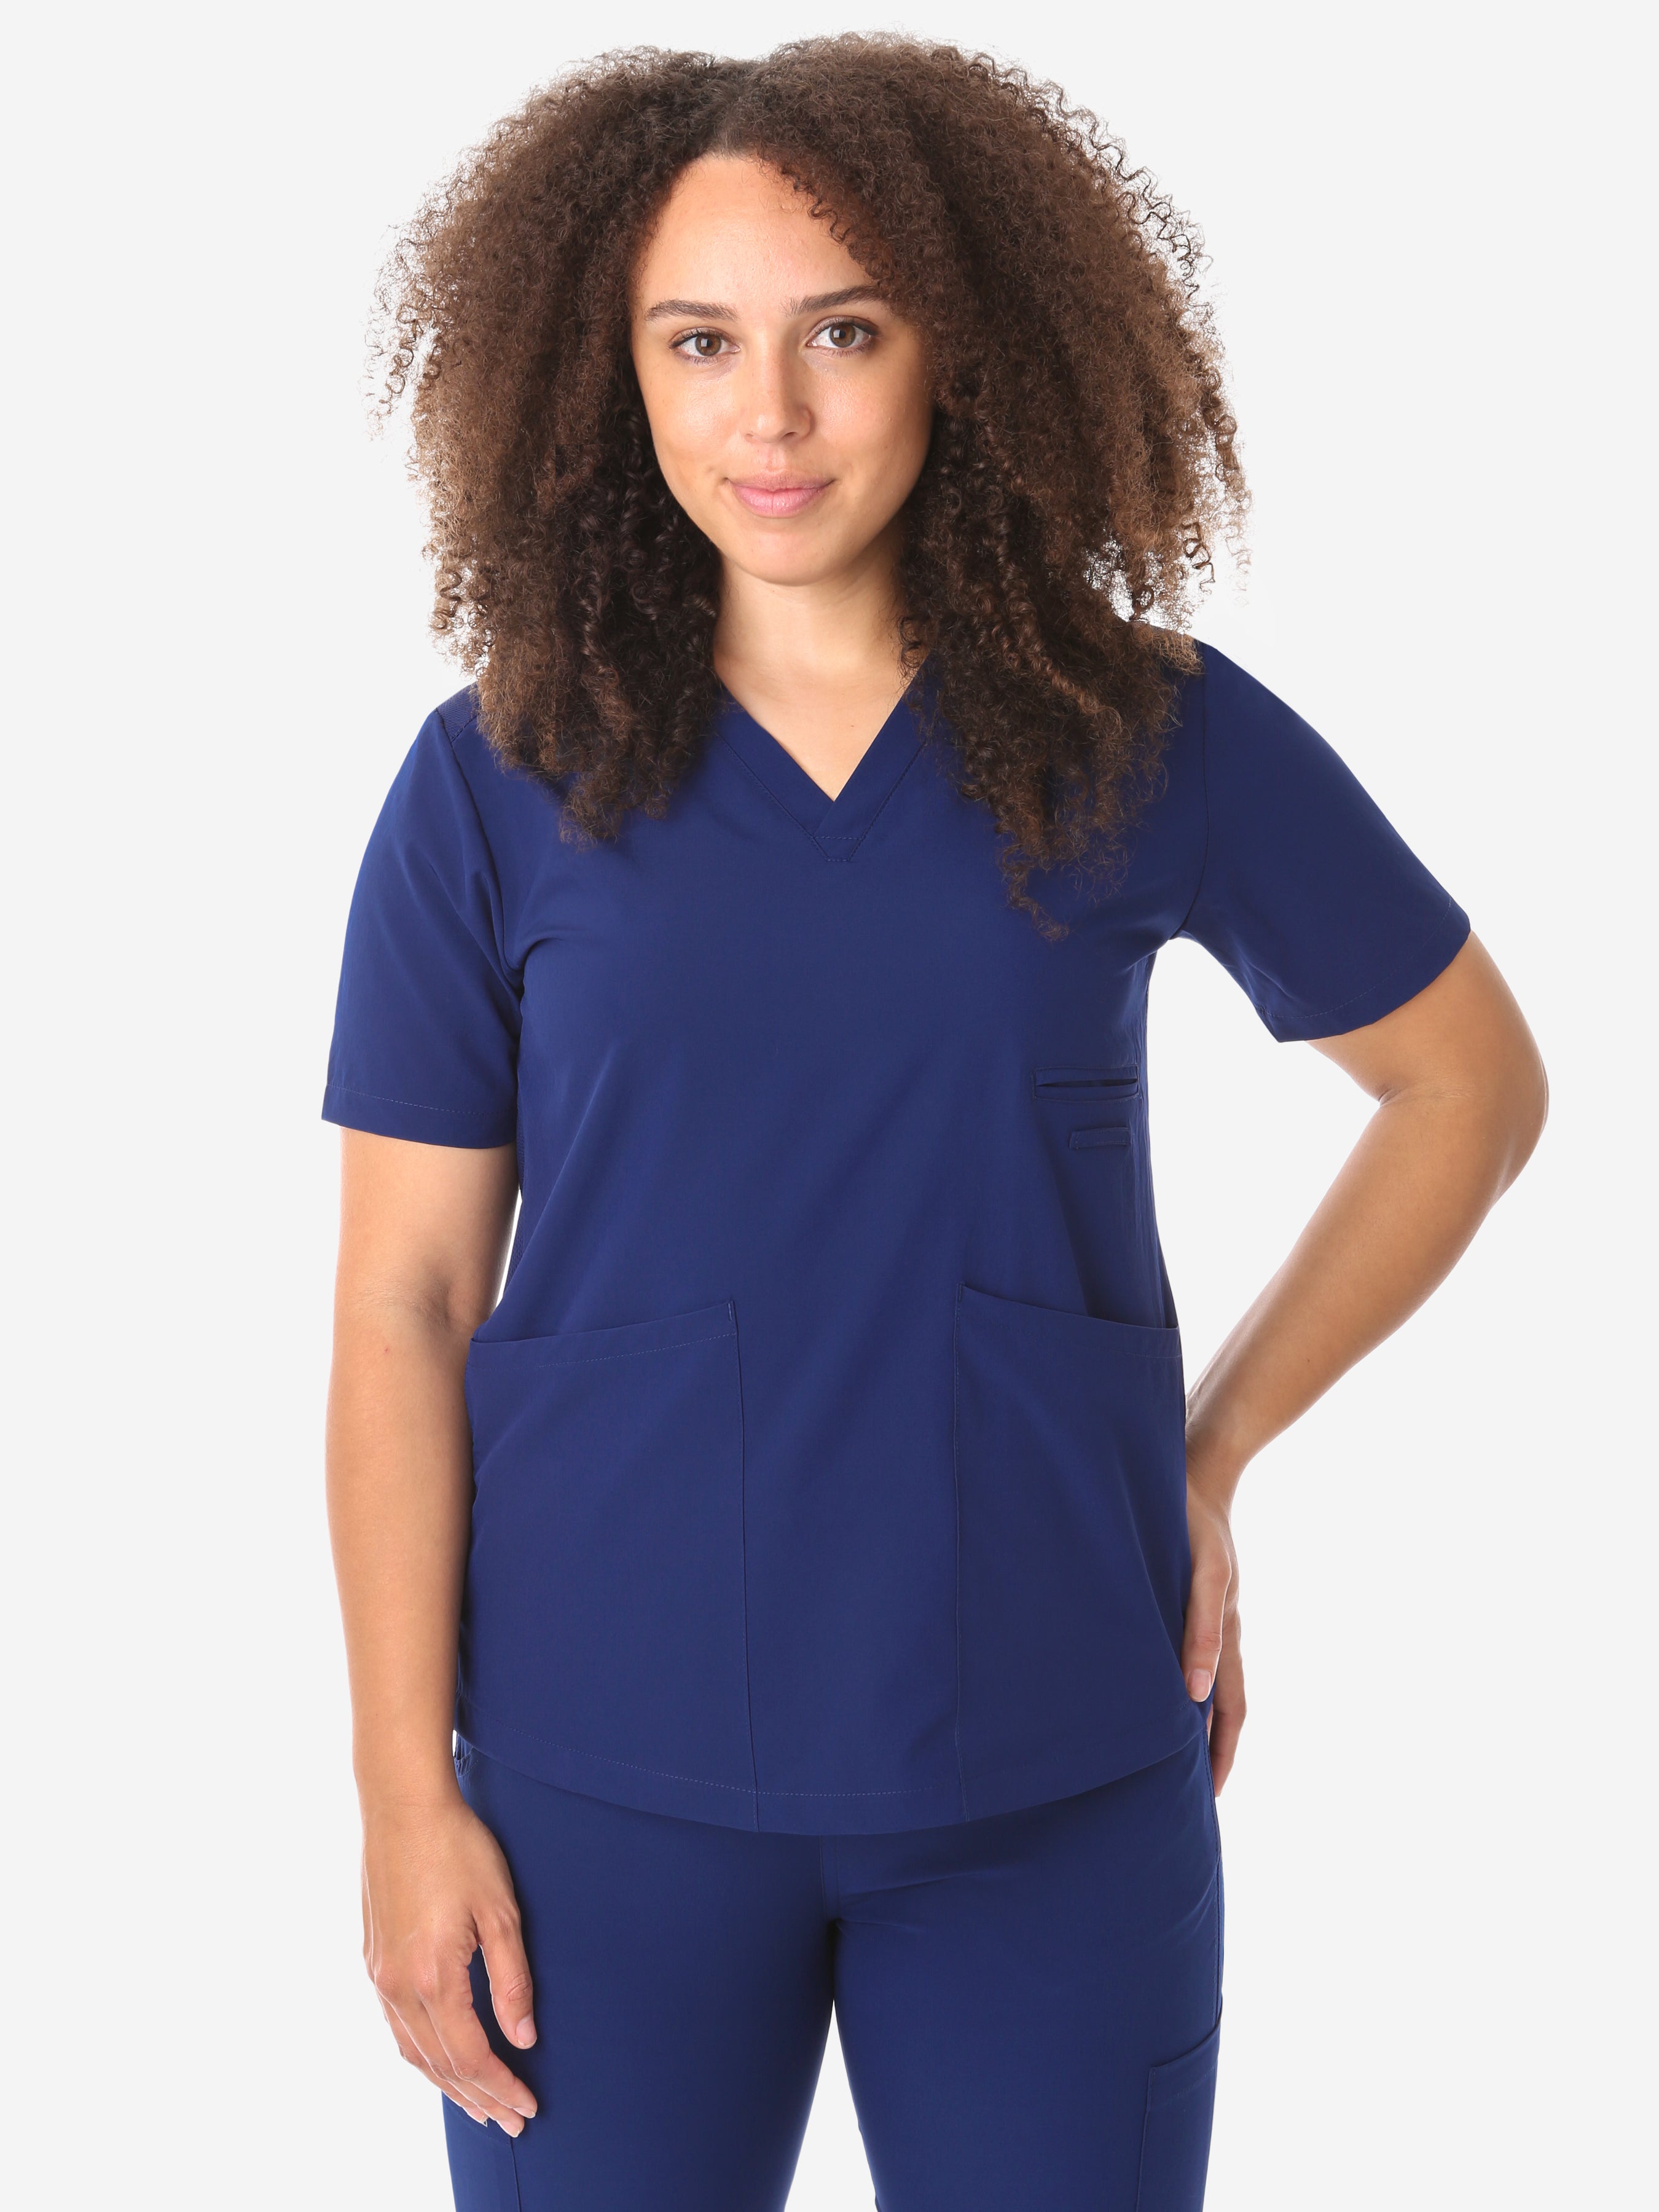 Women's Four-Pocket Scrub Top Navy Blue Top Only Front View